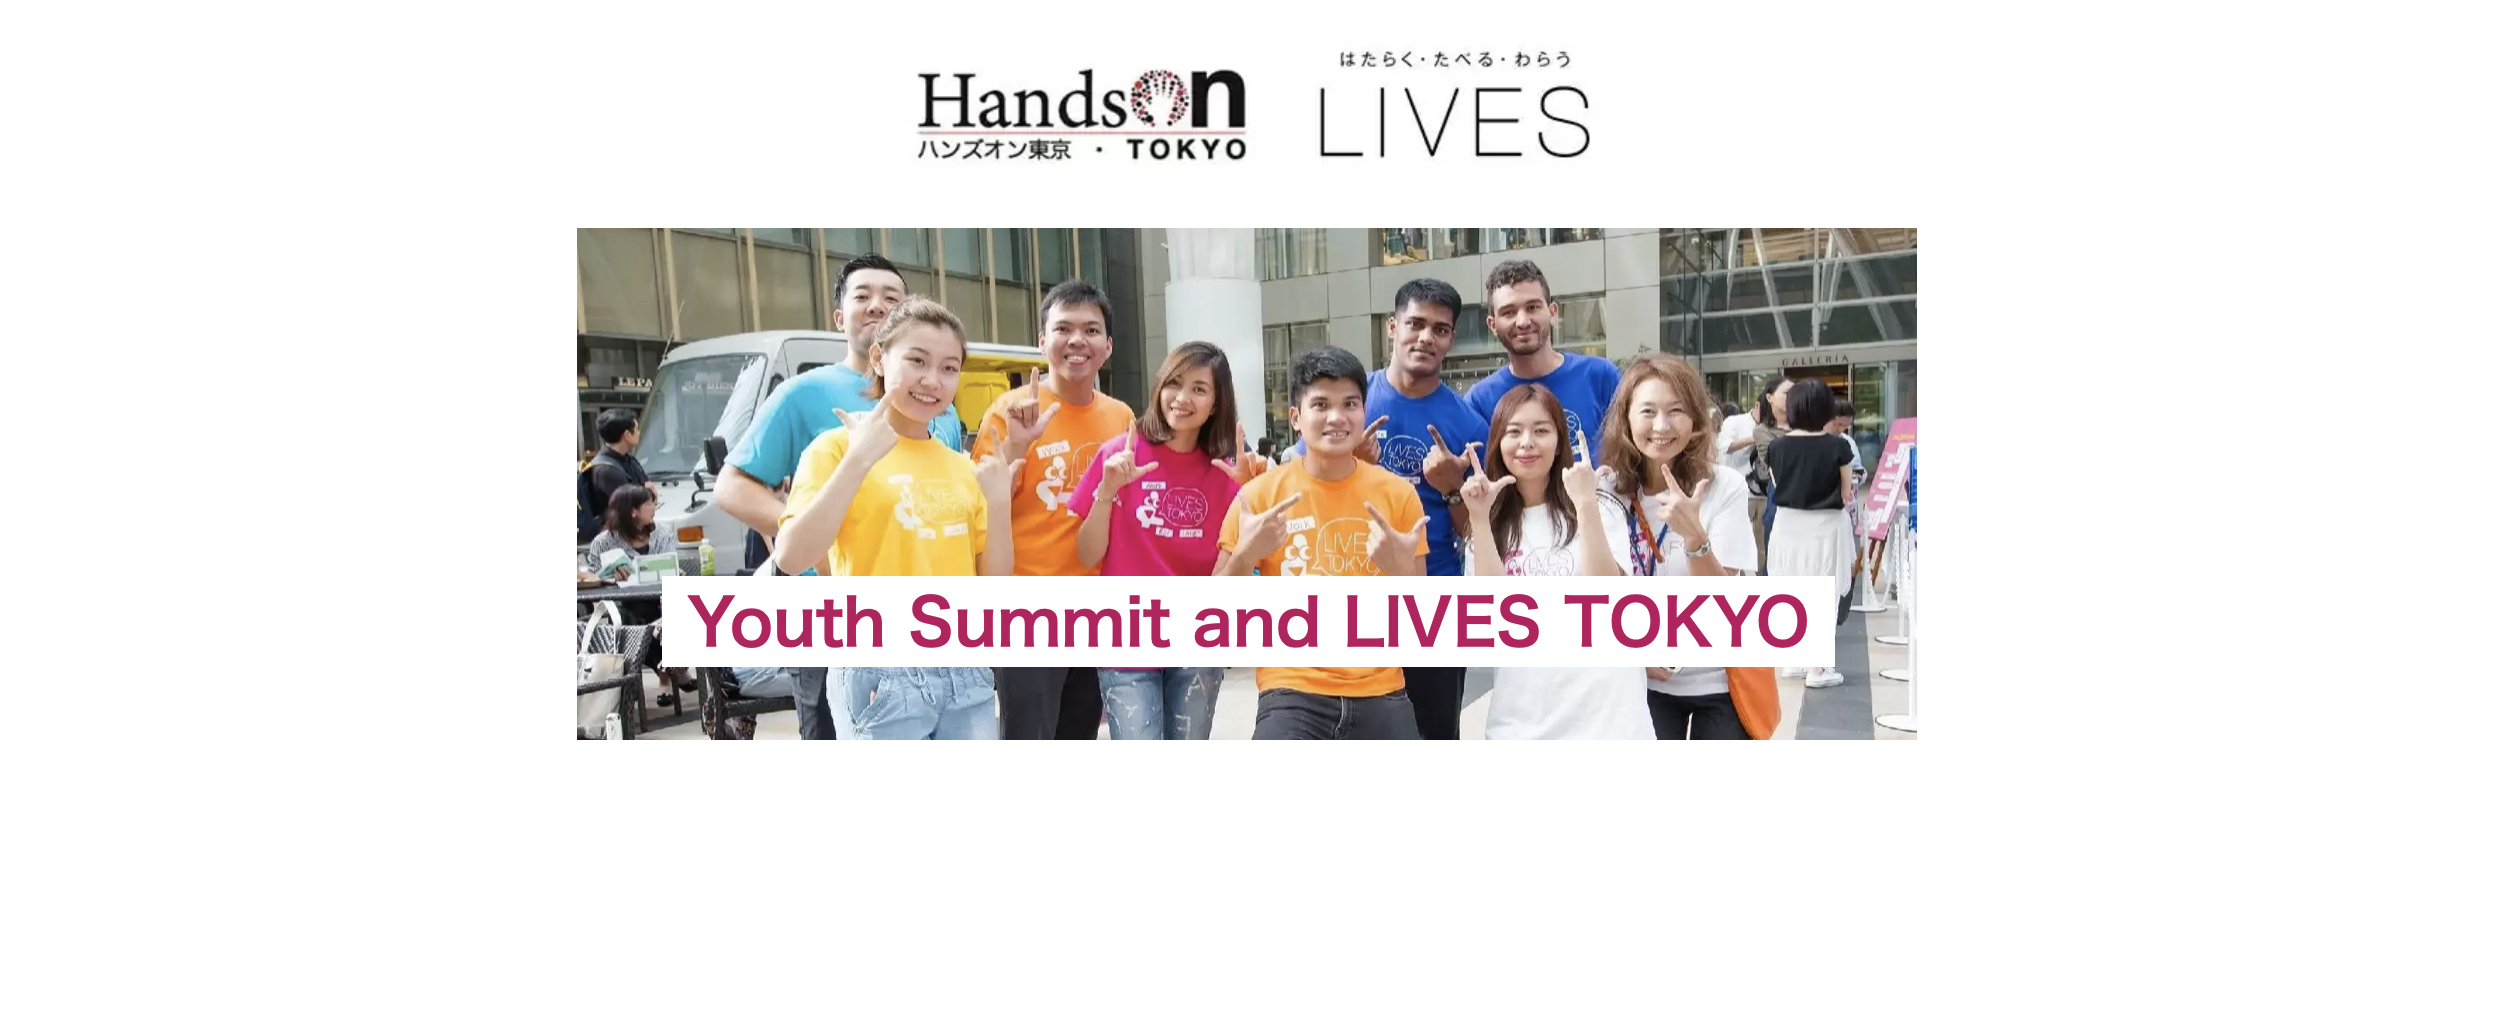 Youth Summit and LIVES TOKYO